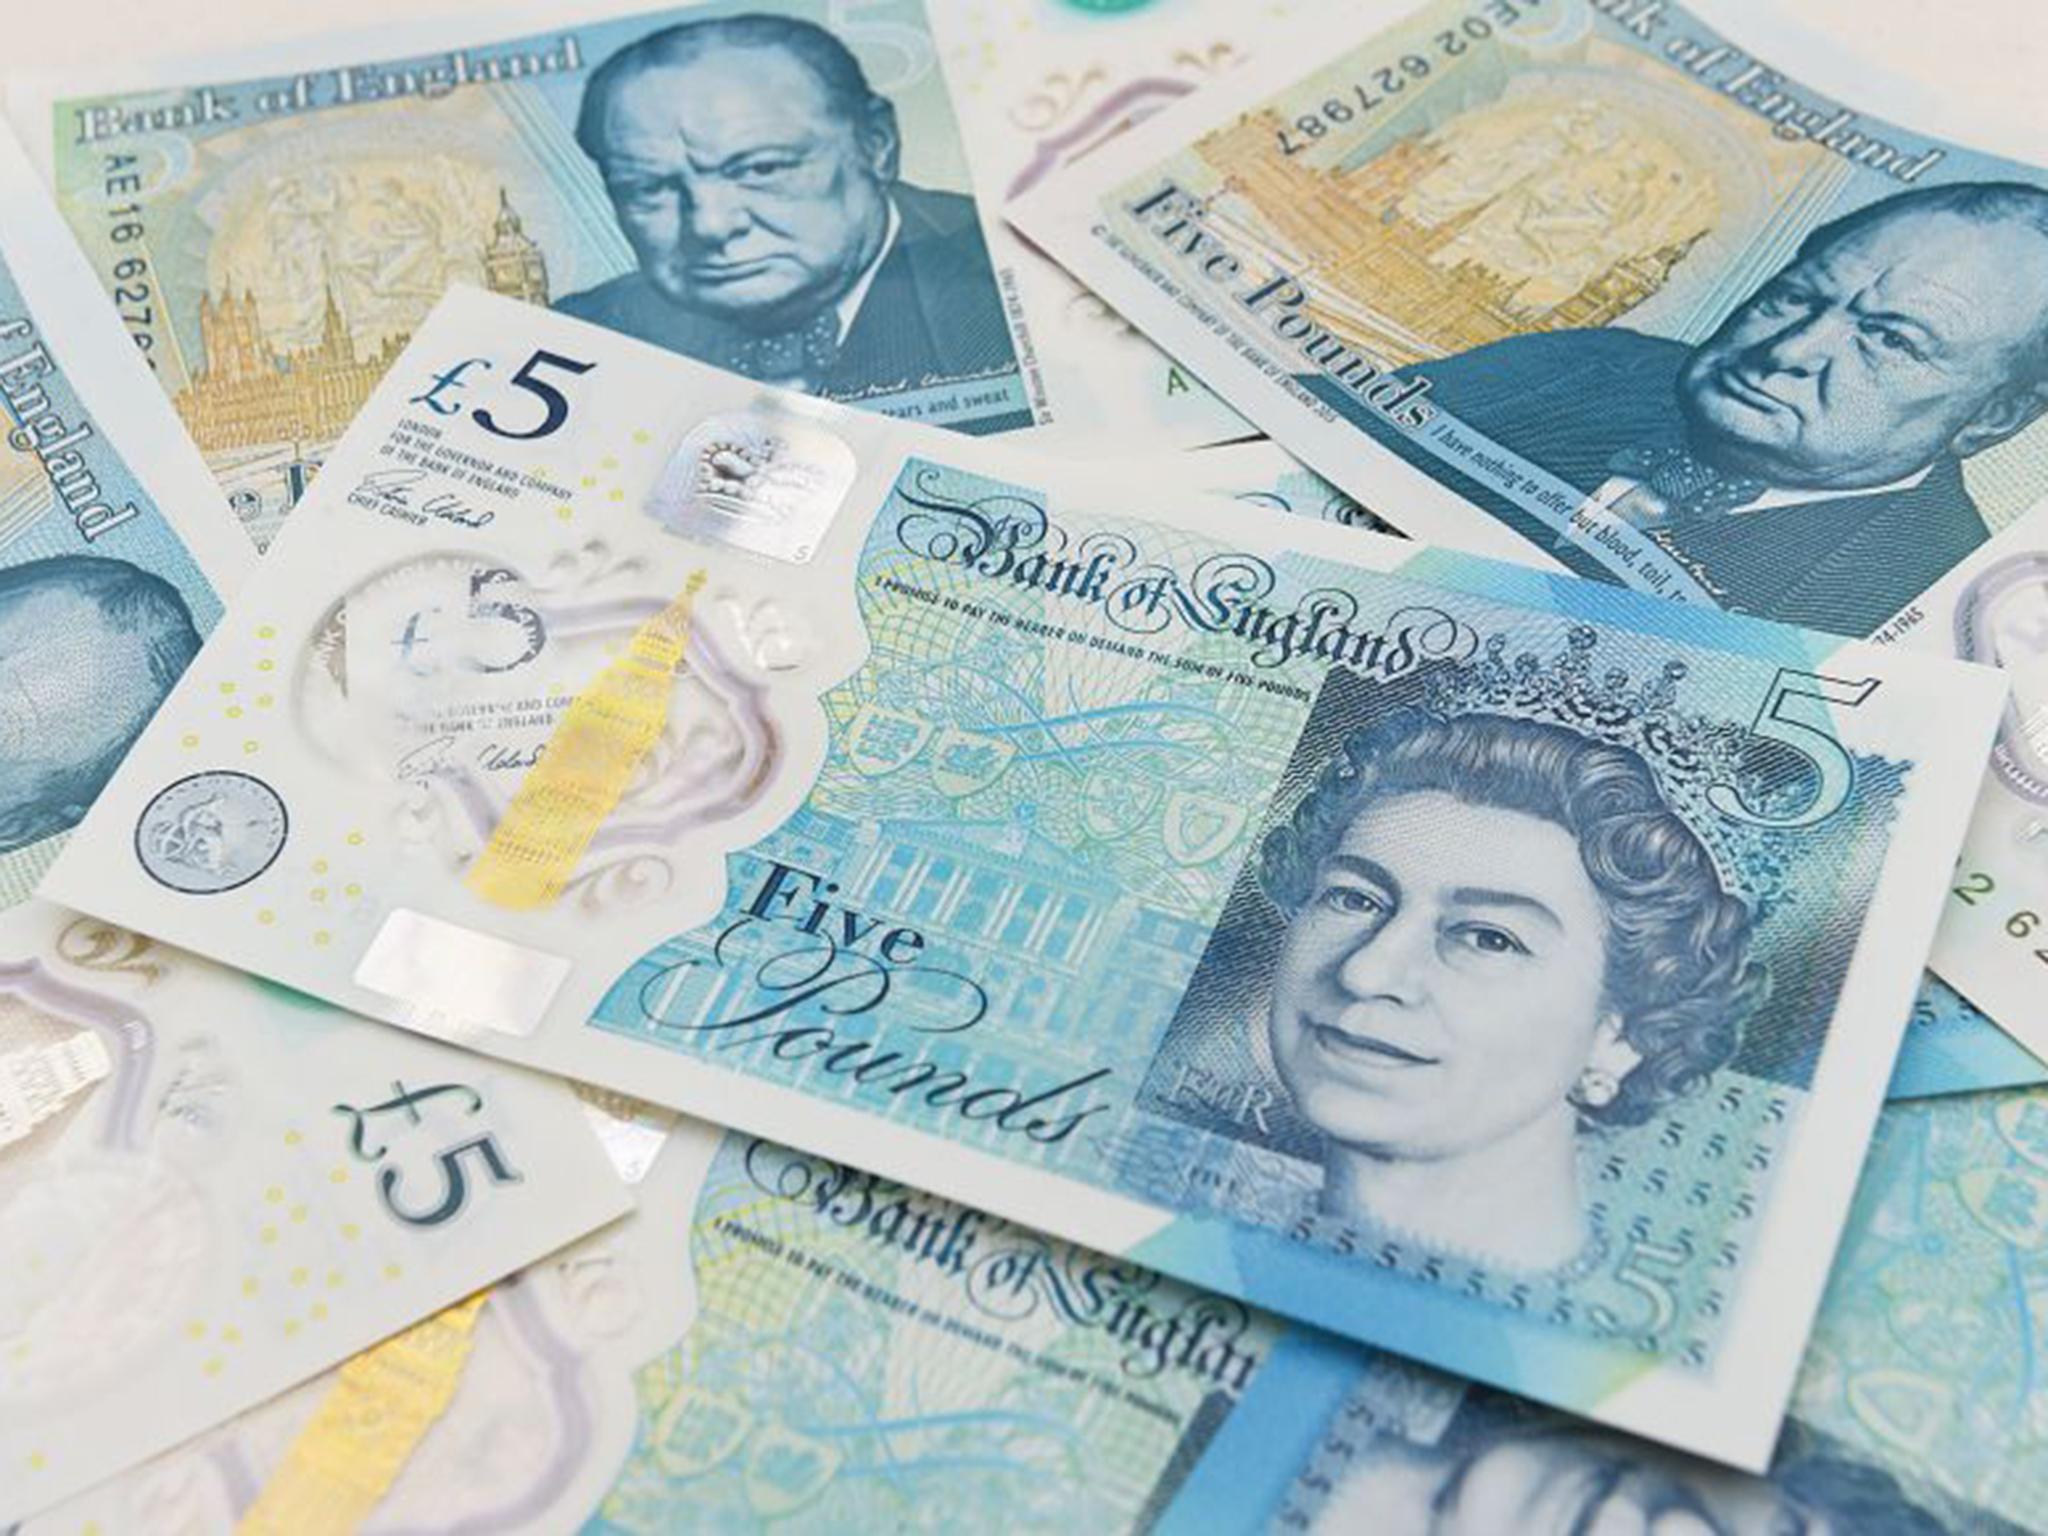 The Bank of England has announced that the new £5 note will still contain animal fat